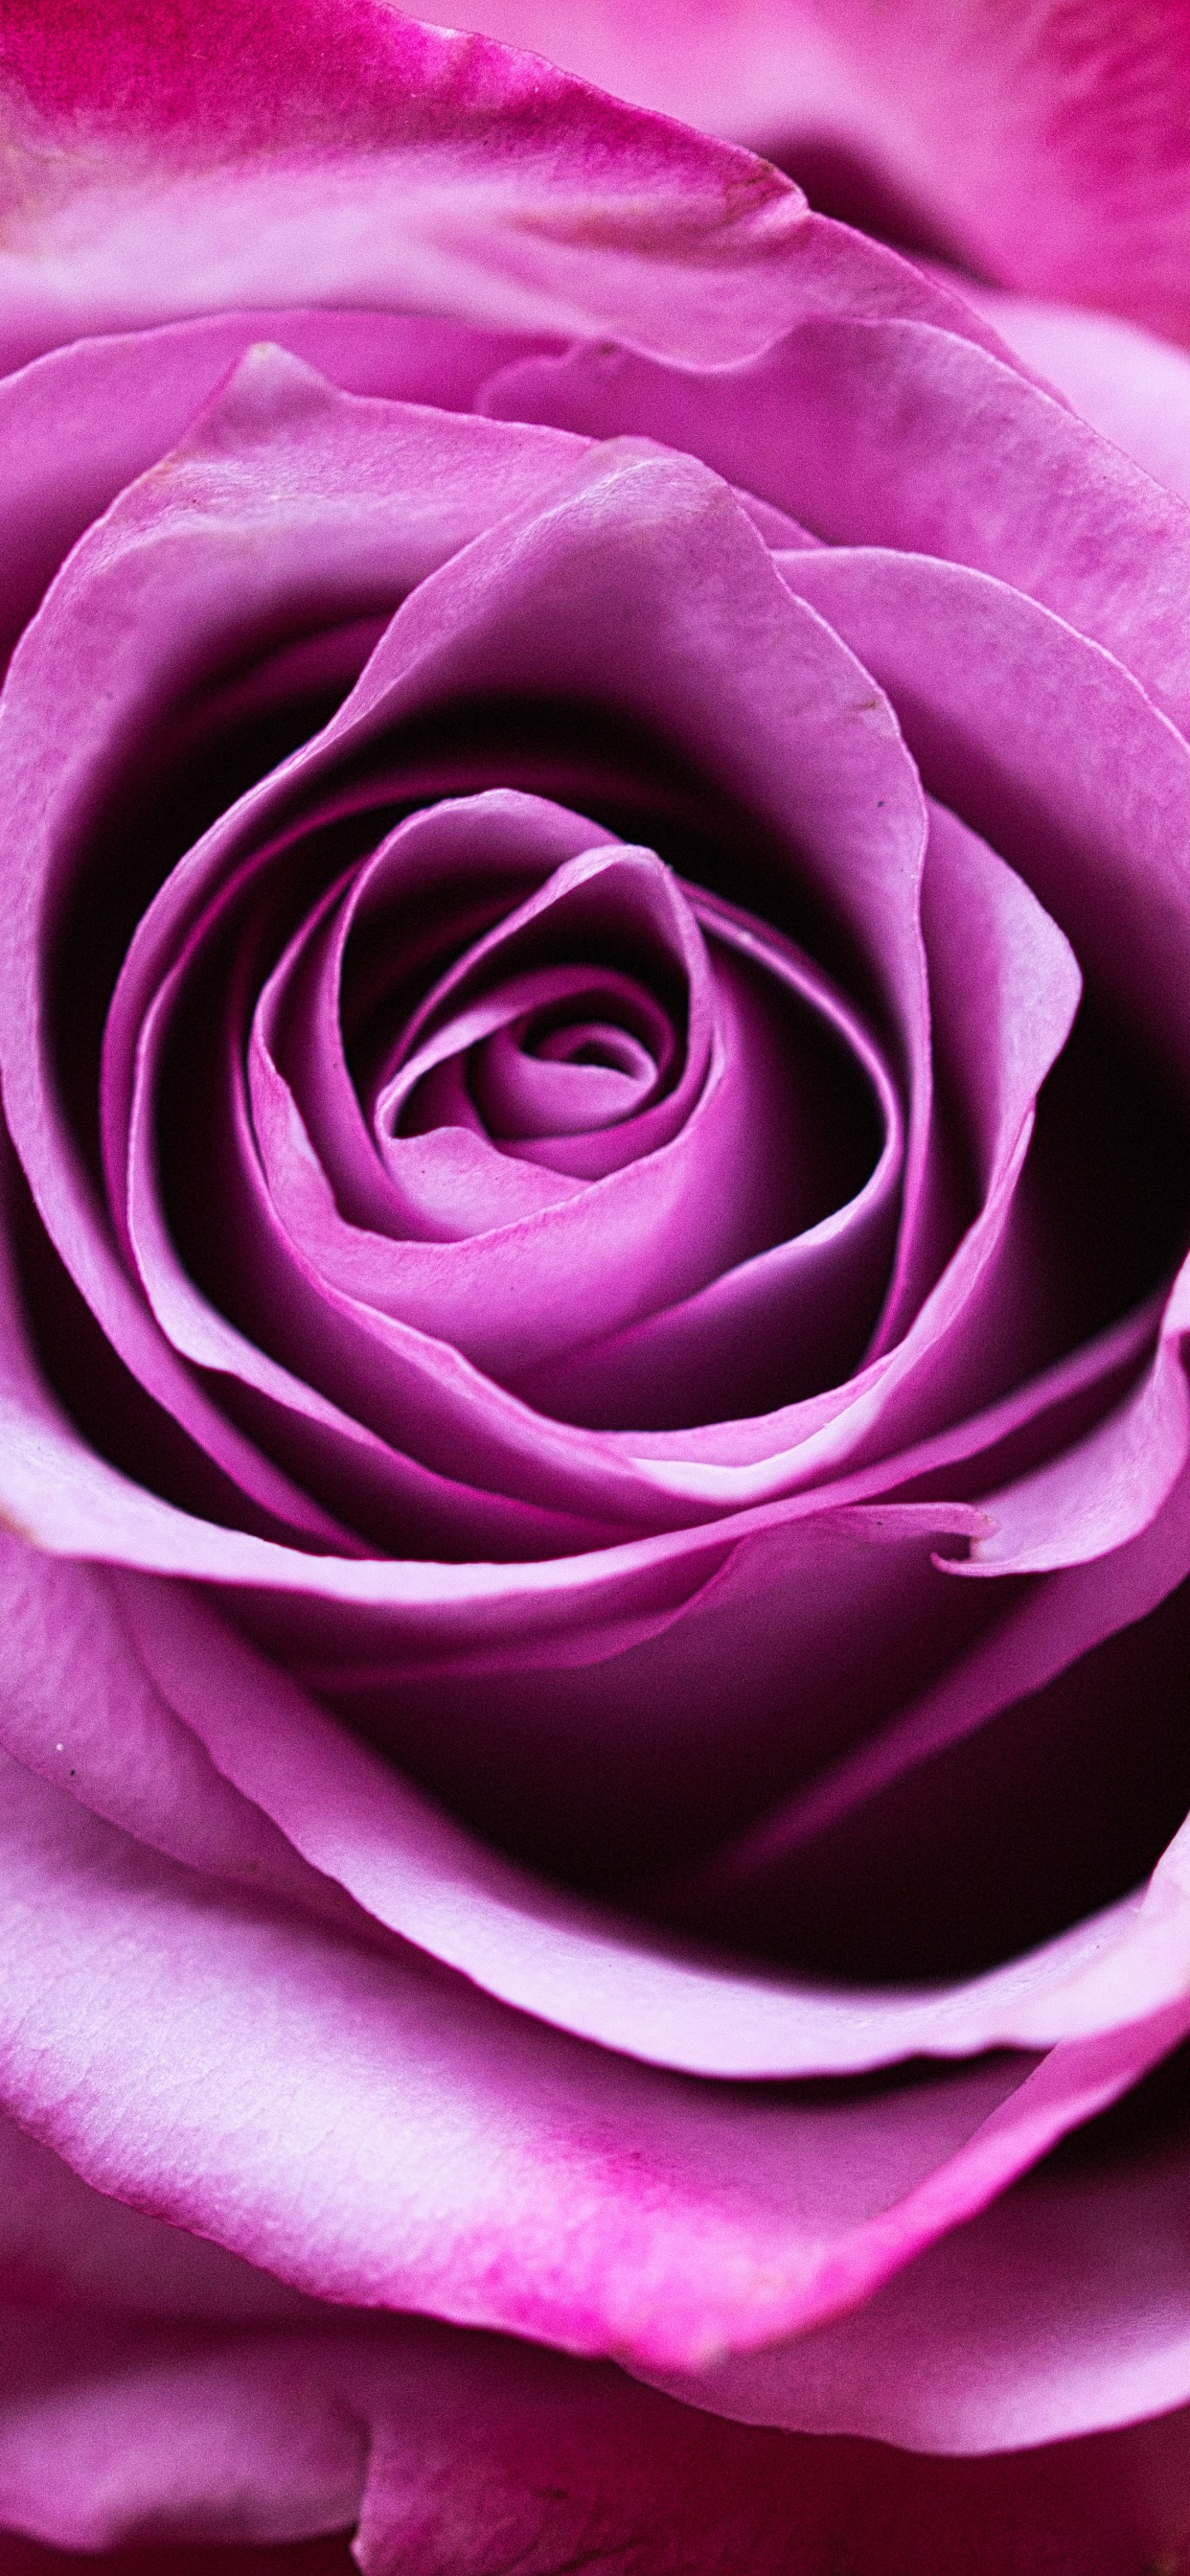 Pink Rose in Close up Photography. Wallpaper in 1242x2688 Resolution